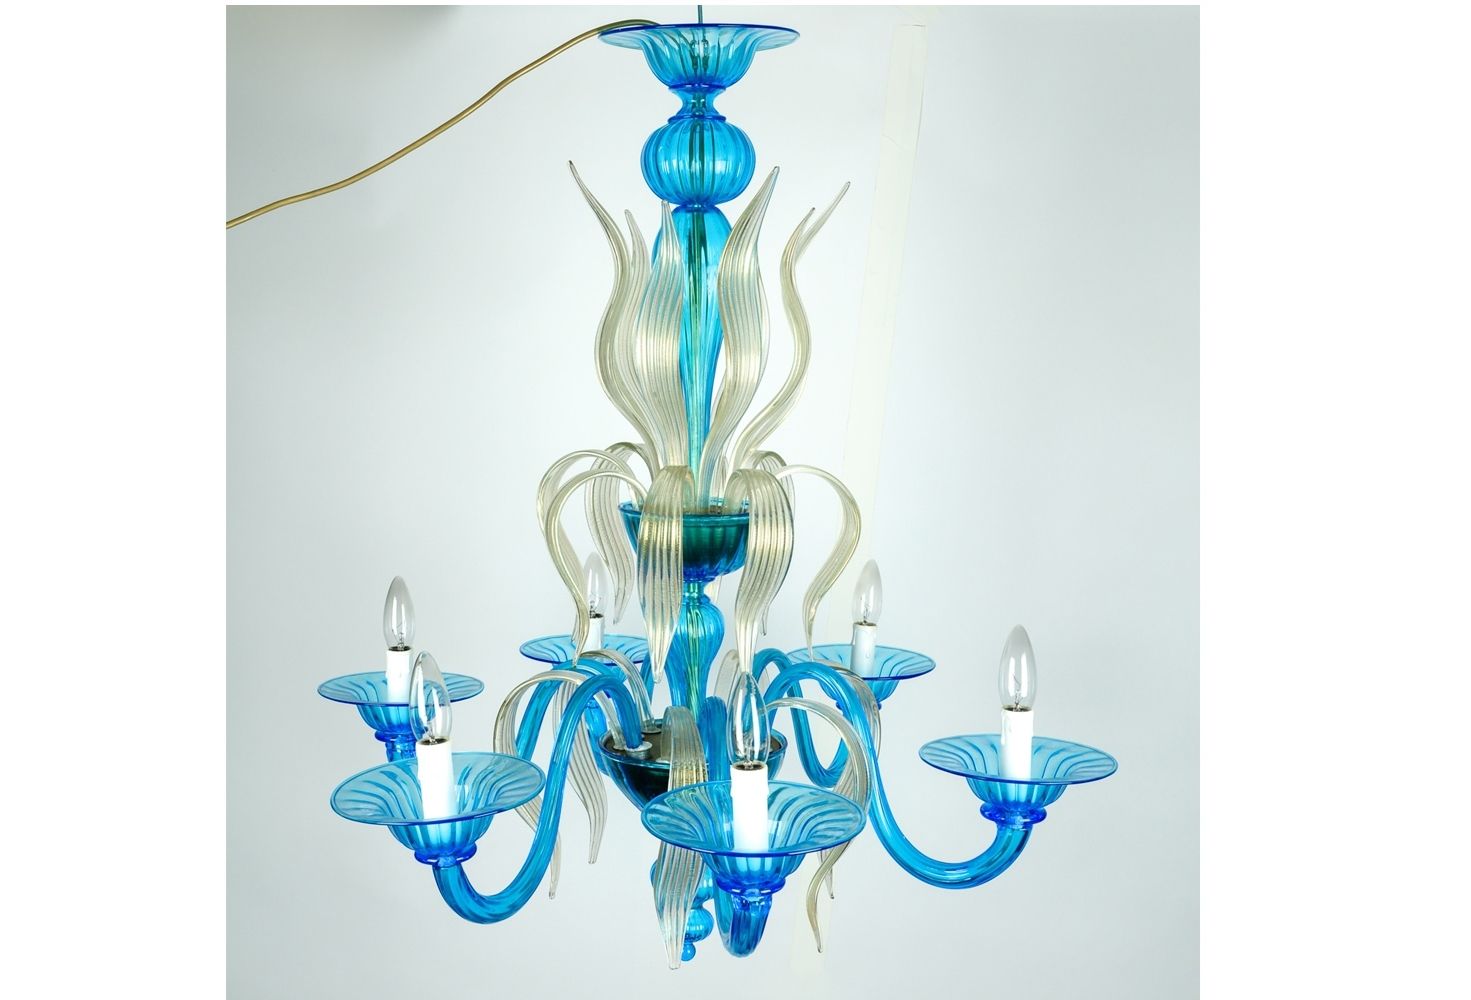 Turquoise Blown Glass Chandeliers Throughout Latest Venetian Handblown Six Arms Turquoise With Gold Flecks Chandelier (View 9 of 15)